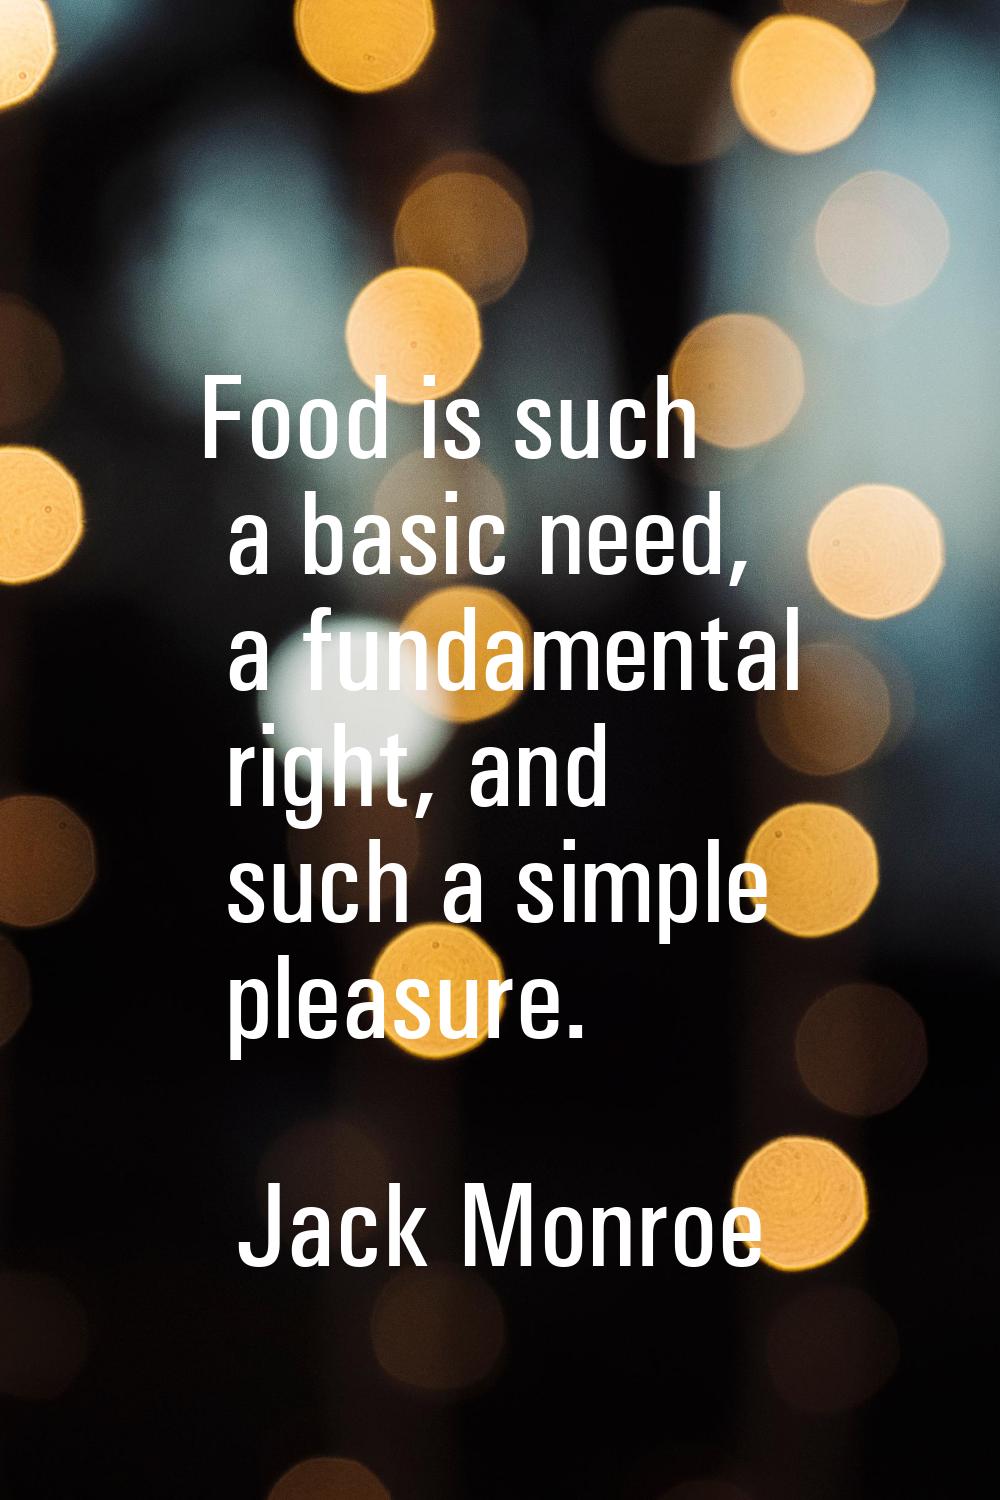 Food is such a basic need, a fundamental right, and such a simple pleasure.